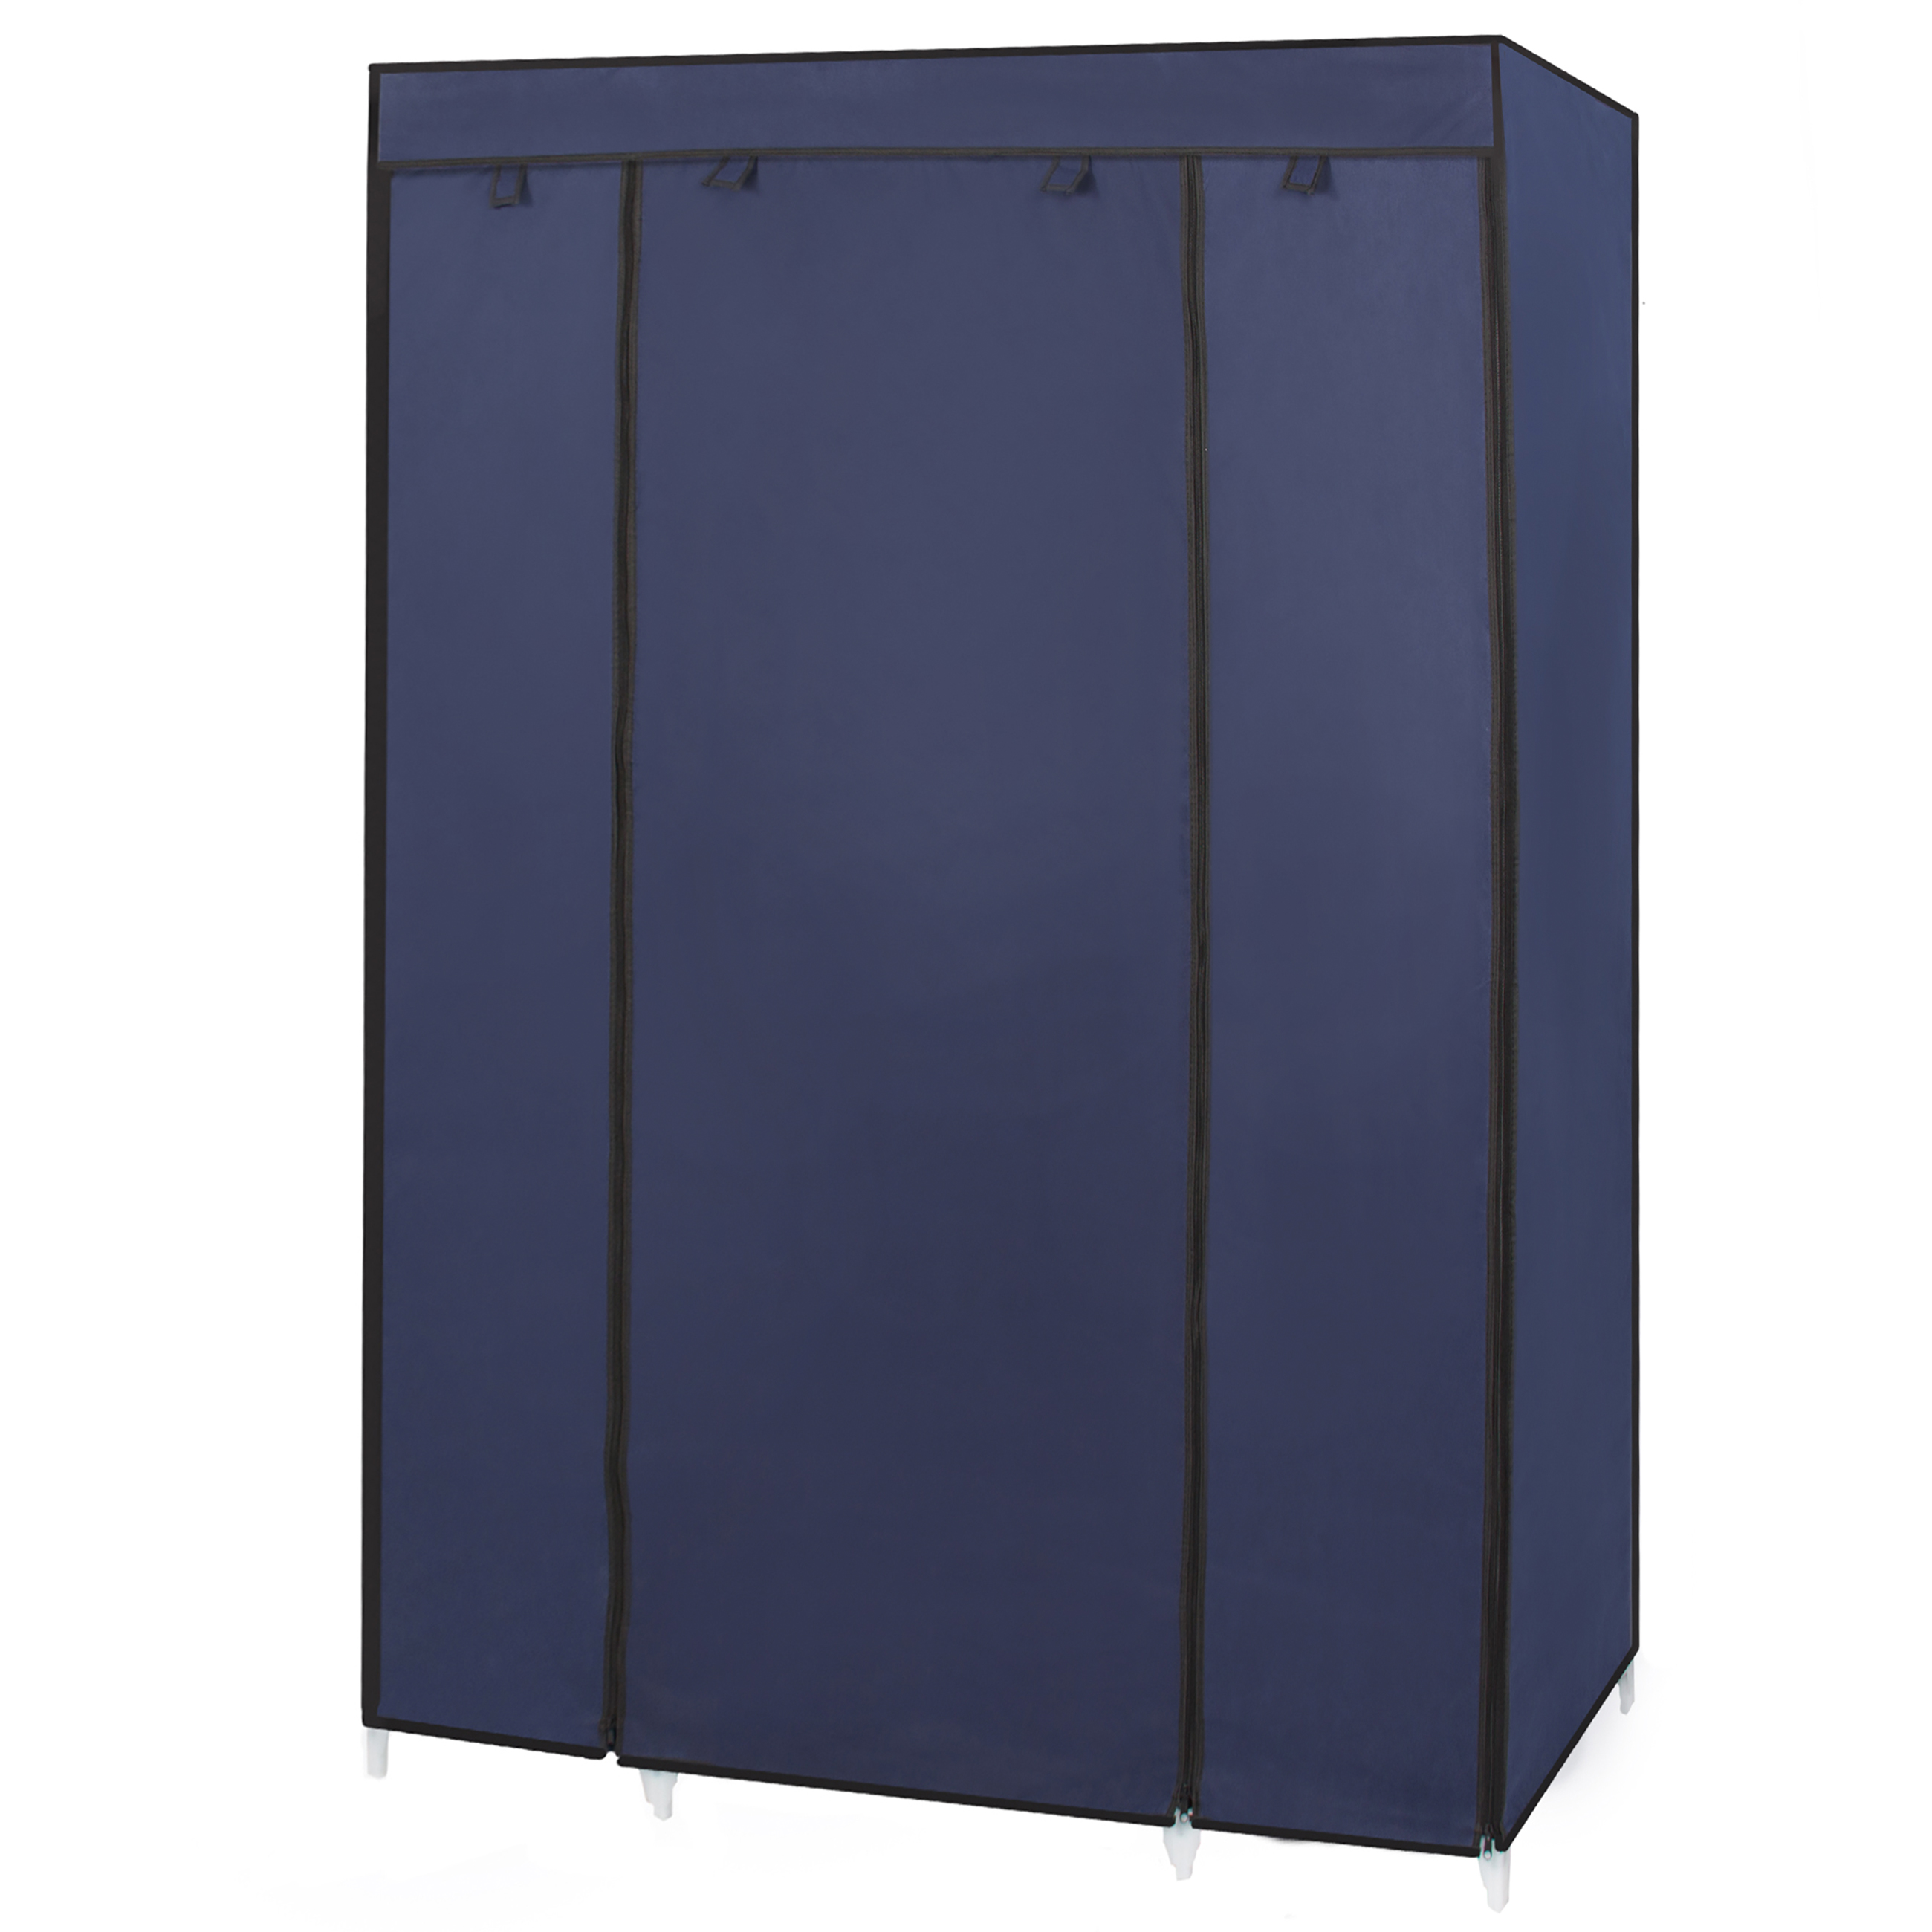 Best Choice Products 13-Shelf Portable Fabric Closet Wardrobe Storage Organizer w/ Cover and Hanging Rod - Blue - image 3 of 5